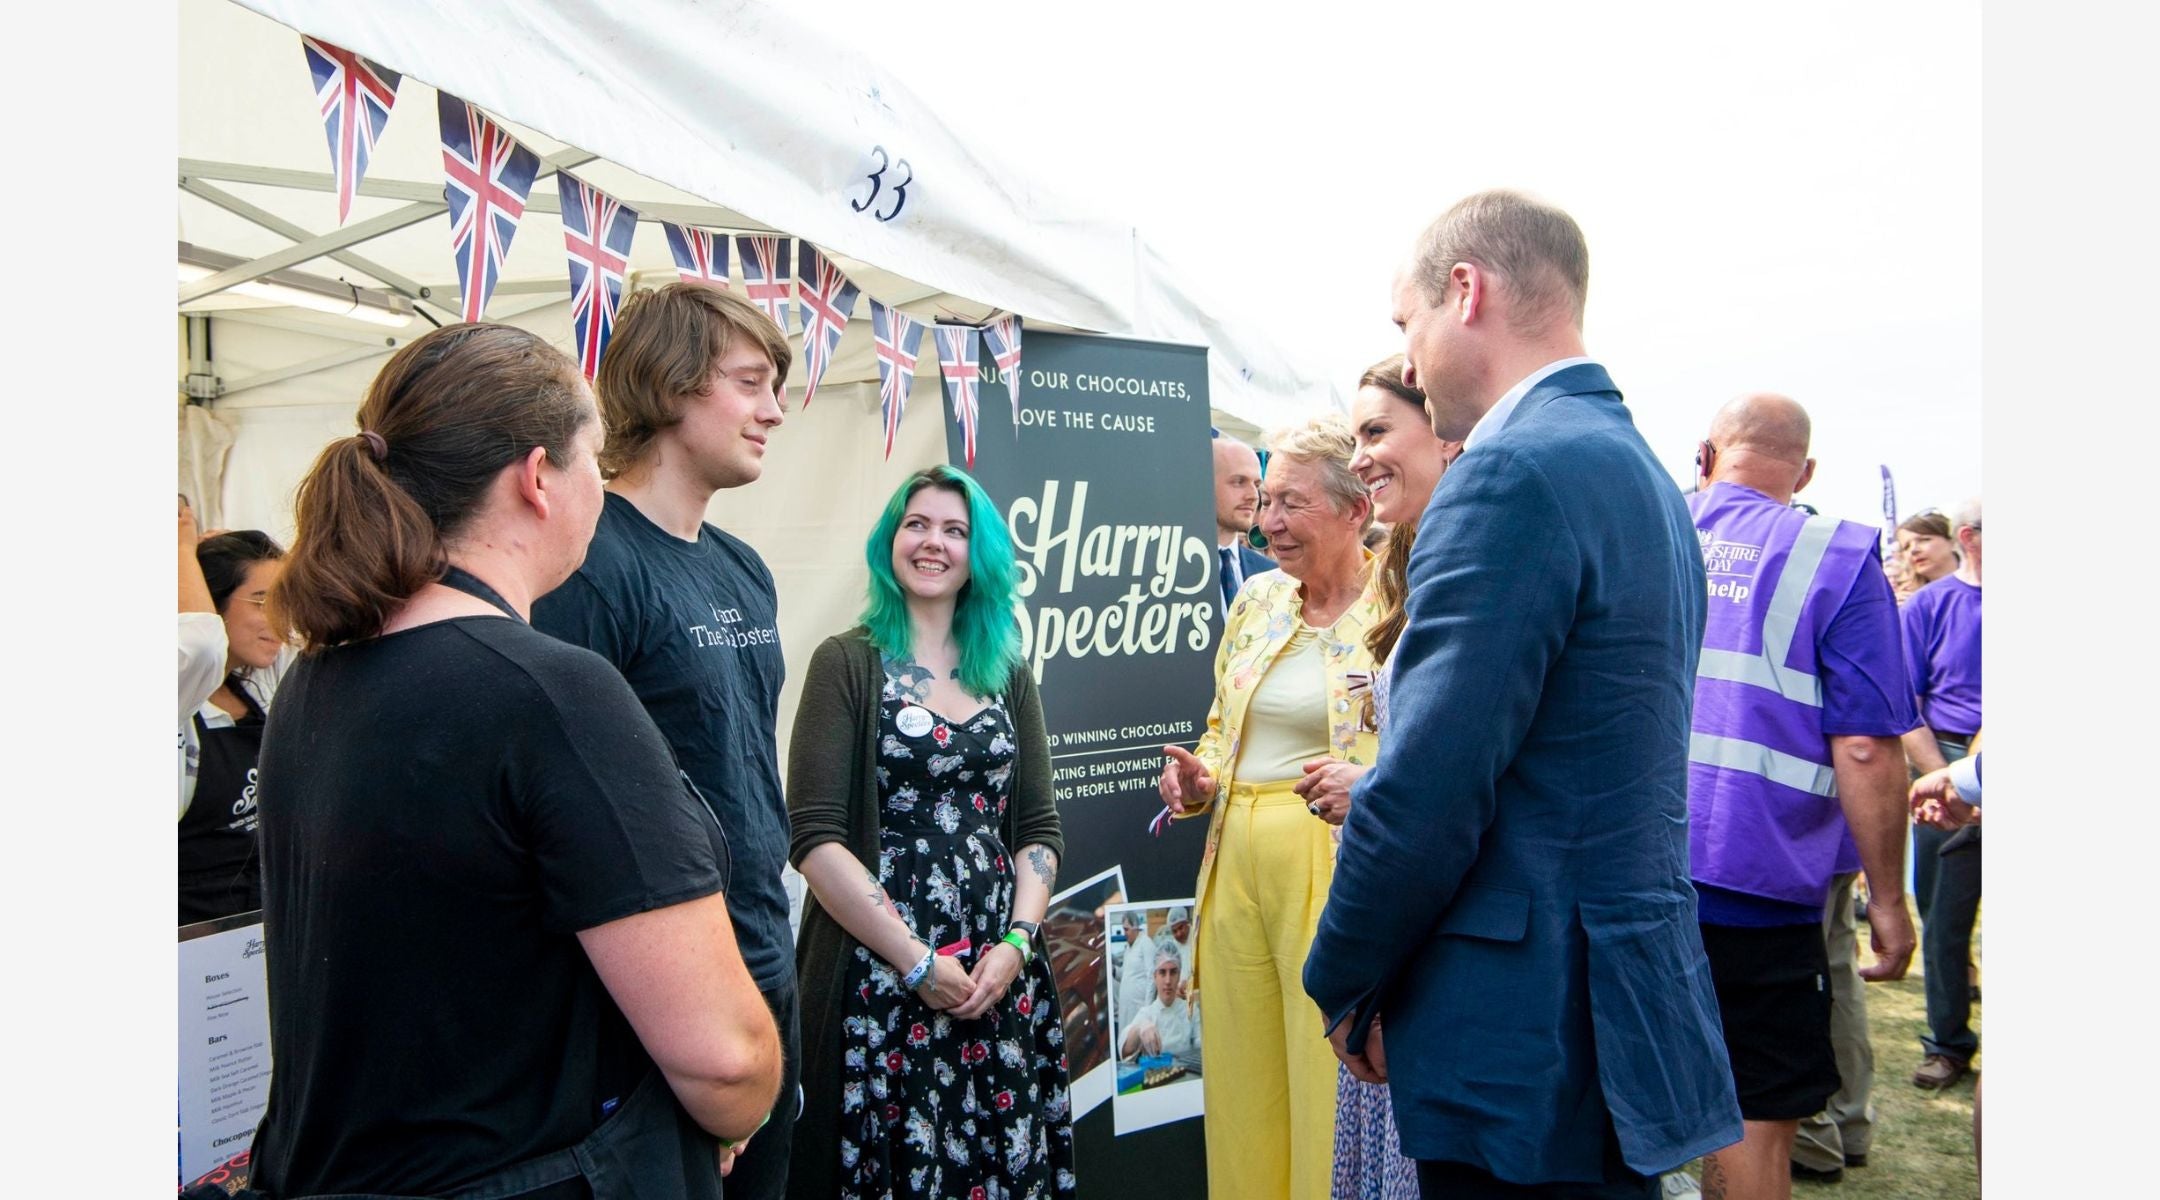 The Prince and Princess of Wales (then Duke and Duches of Cambridge) meeting the Harry Specters Team